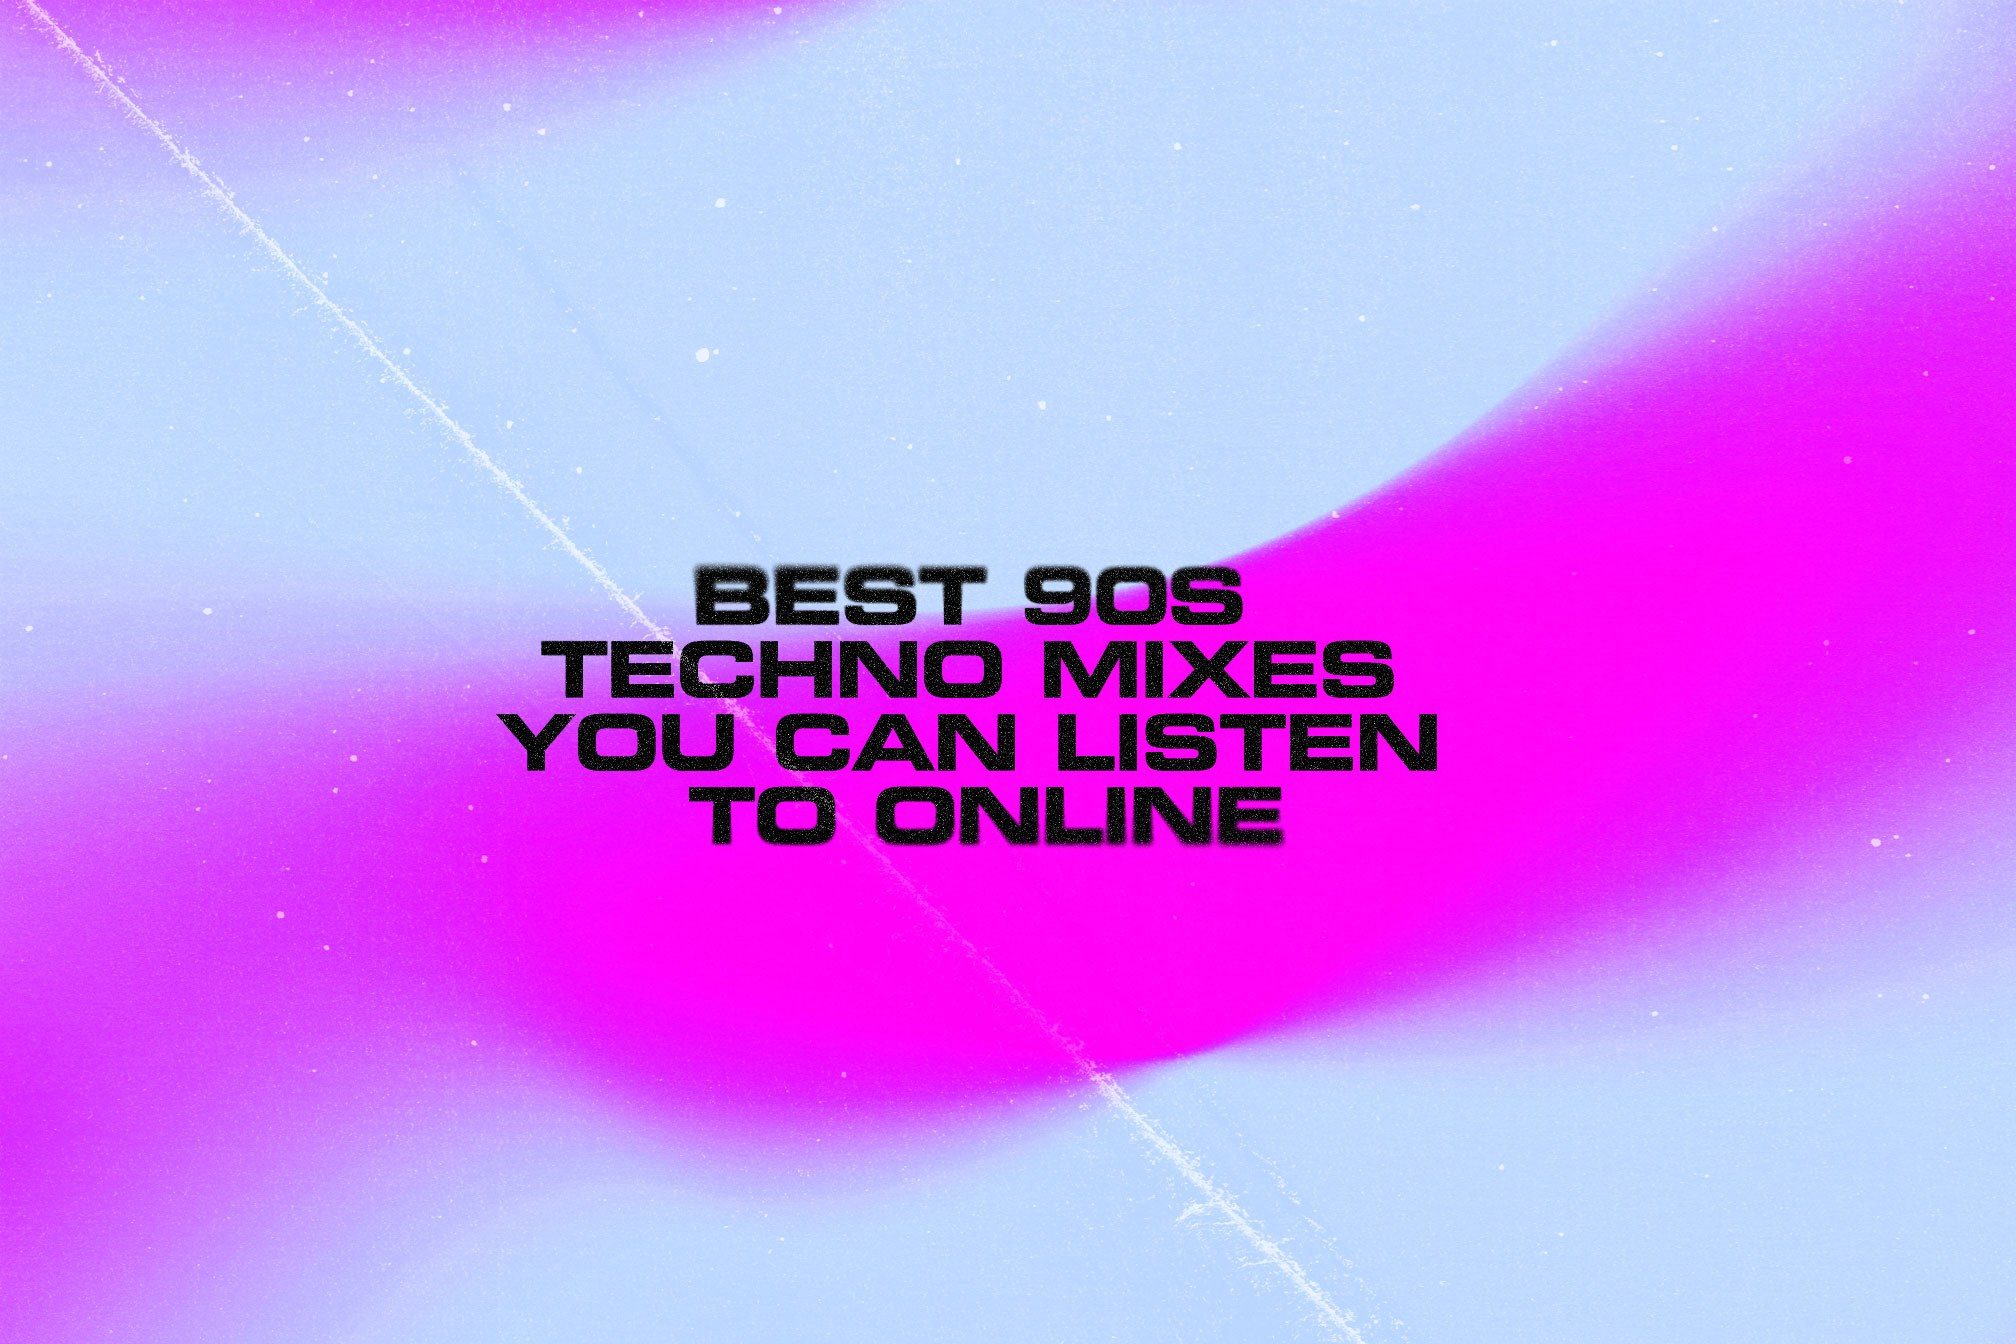 Centrum minimum forbrydelse 48 of the best 90s techno mixes you can listen to online - Features - Mixmag